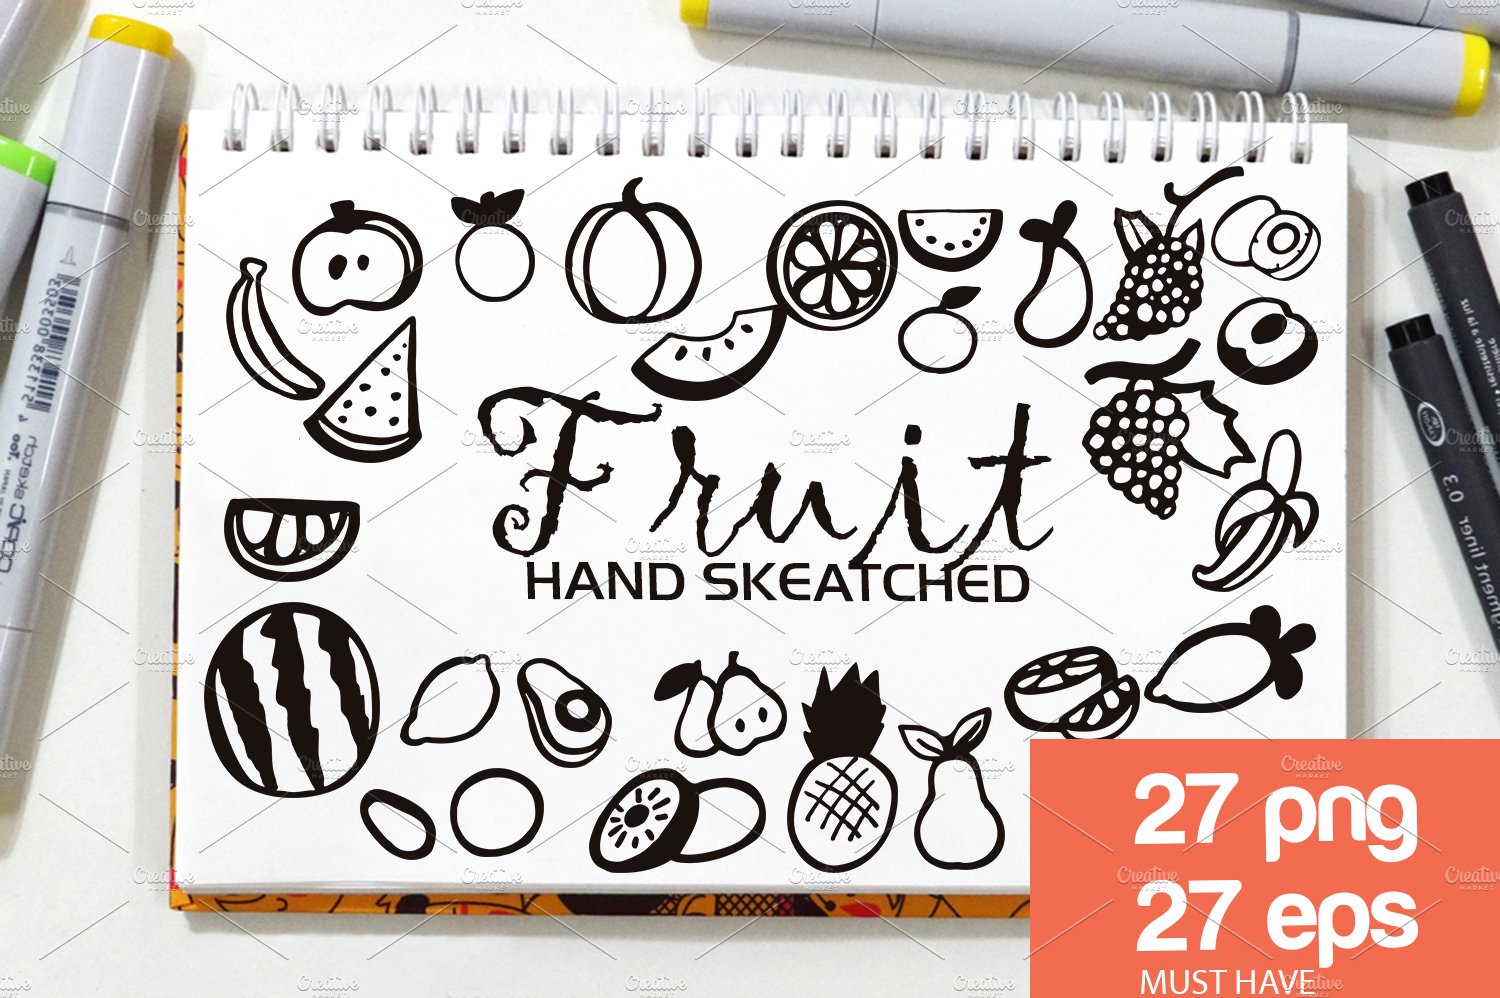 Fruit ClipArt - Vector & PNG cover image.